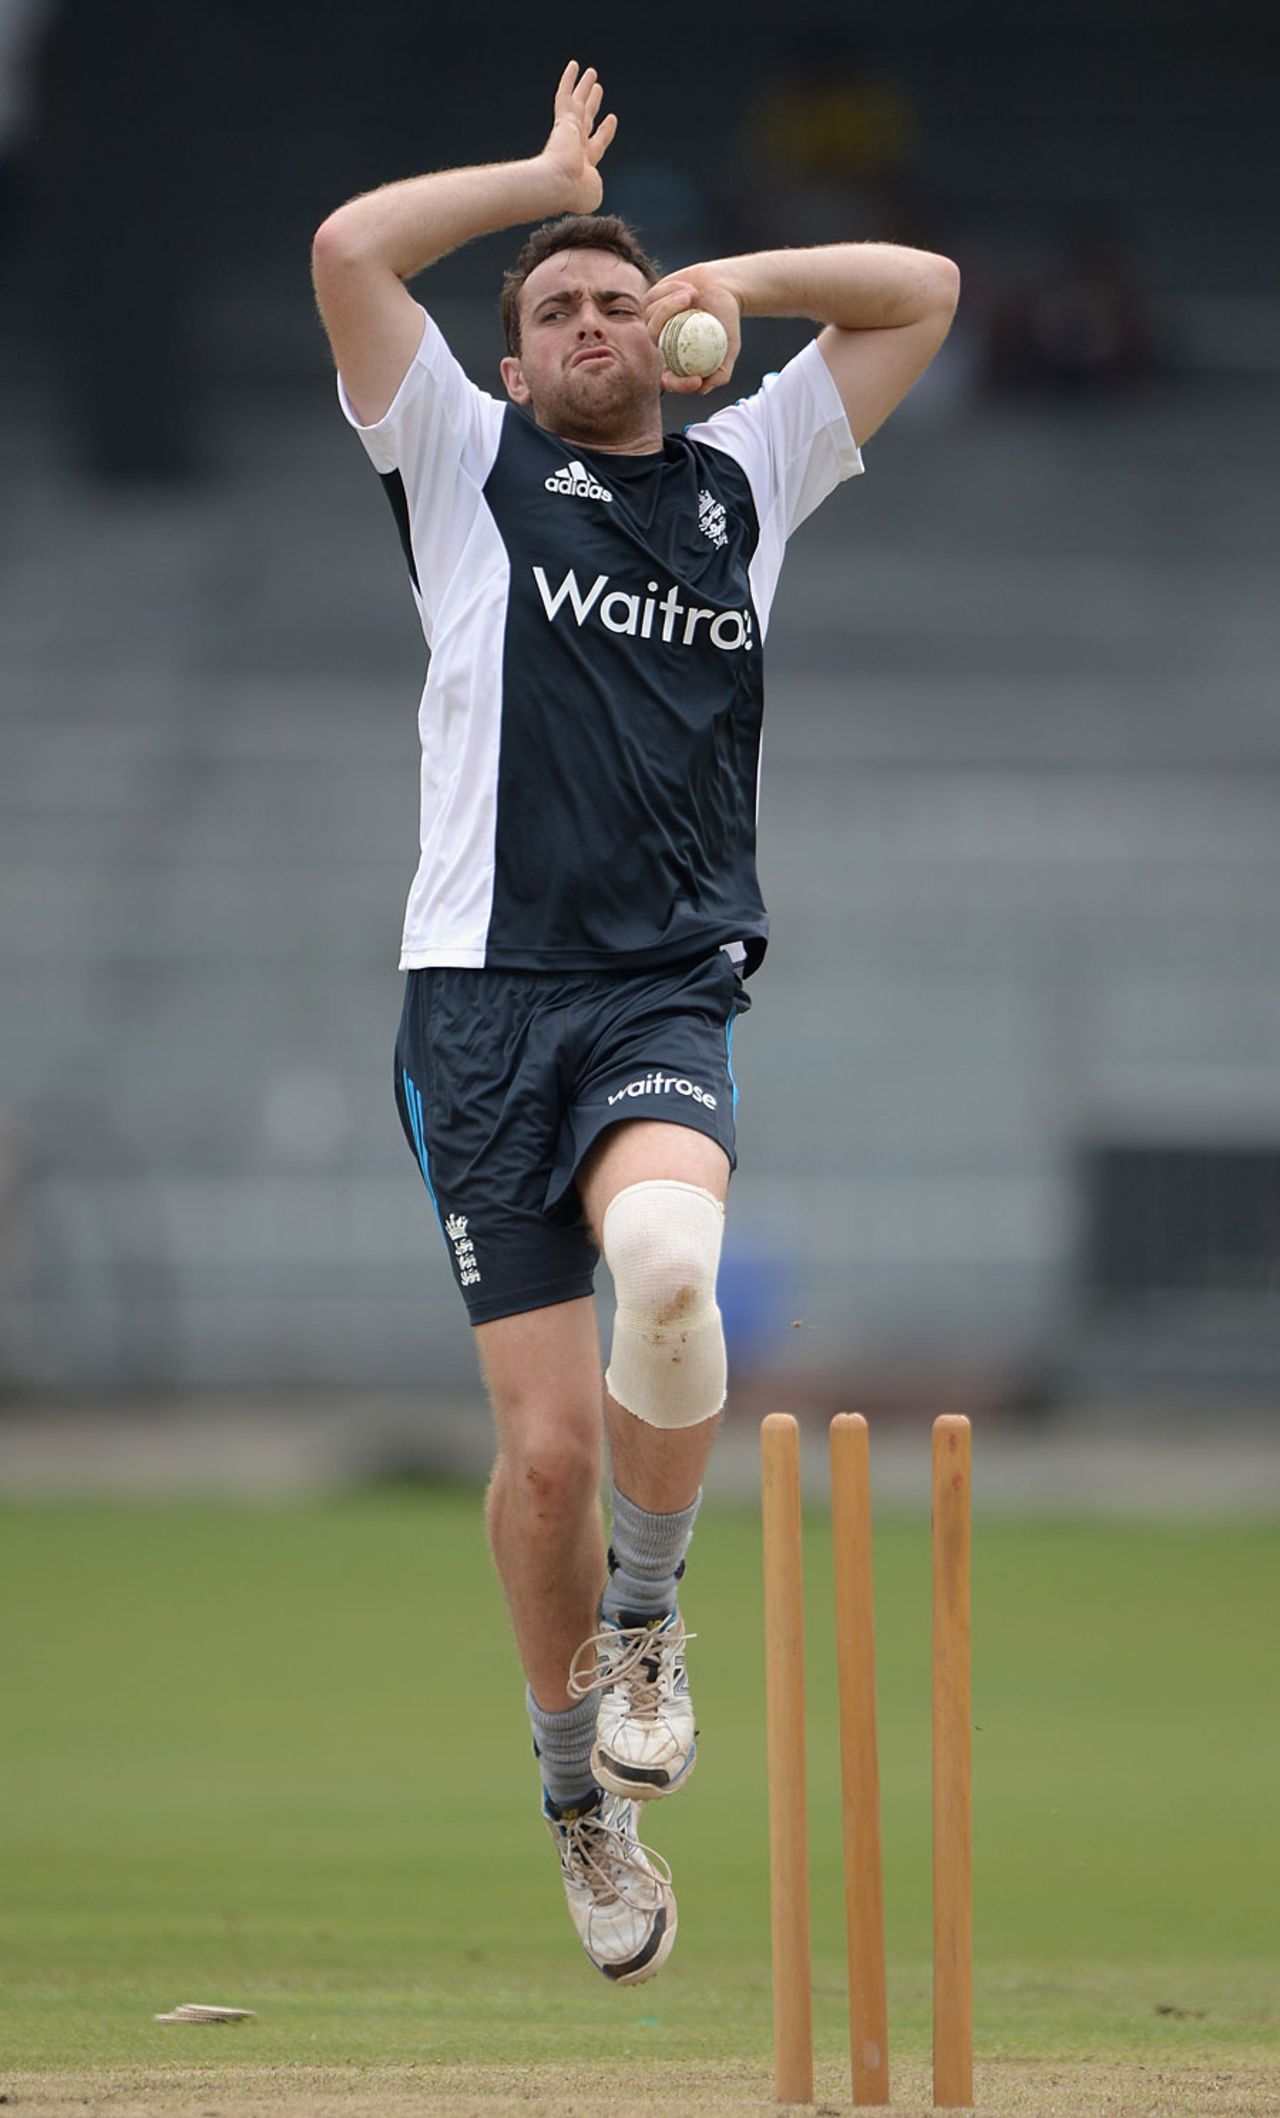 Stephen Parry is one of the England performance squad players also in Sri Lanka, Colombo, November 24, 2014